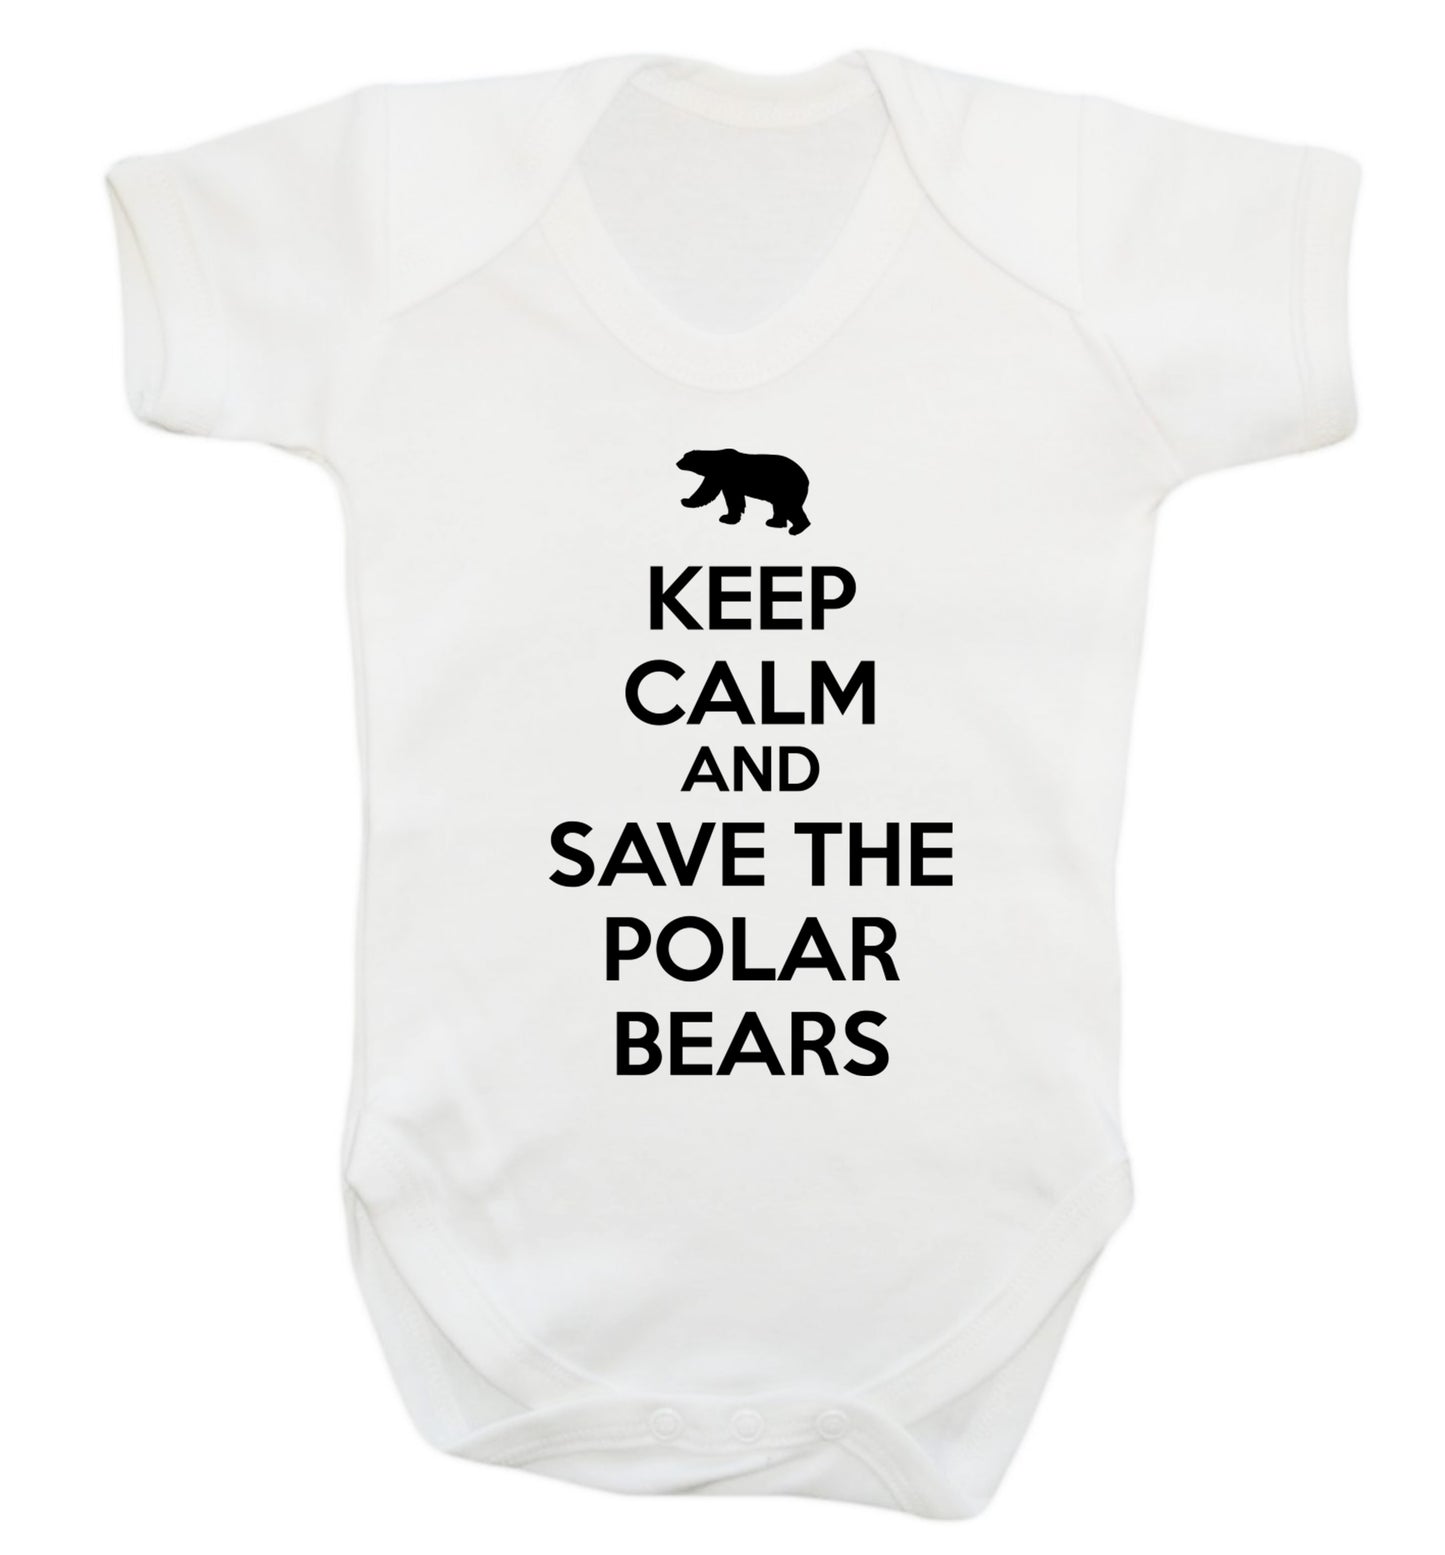 Keep calm and save the polar bears Baby Vest white 18-24 months